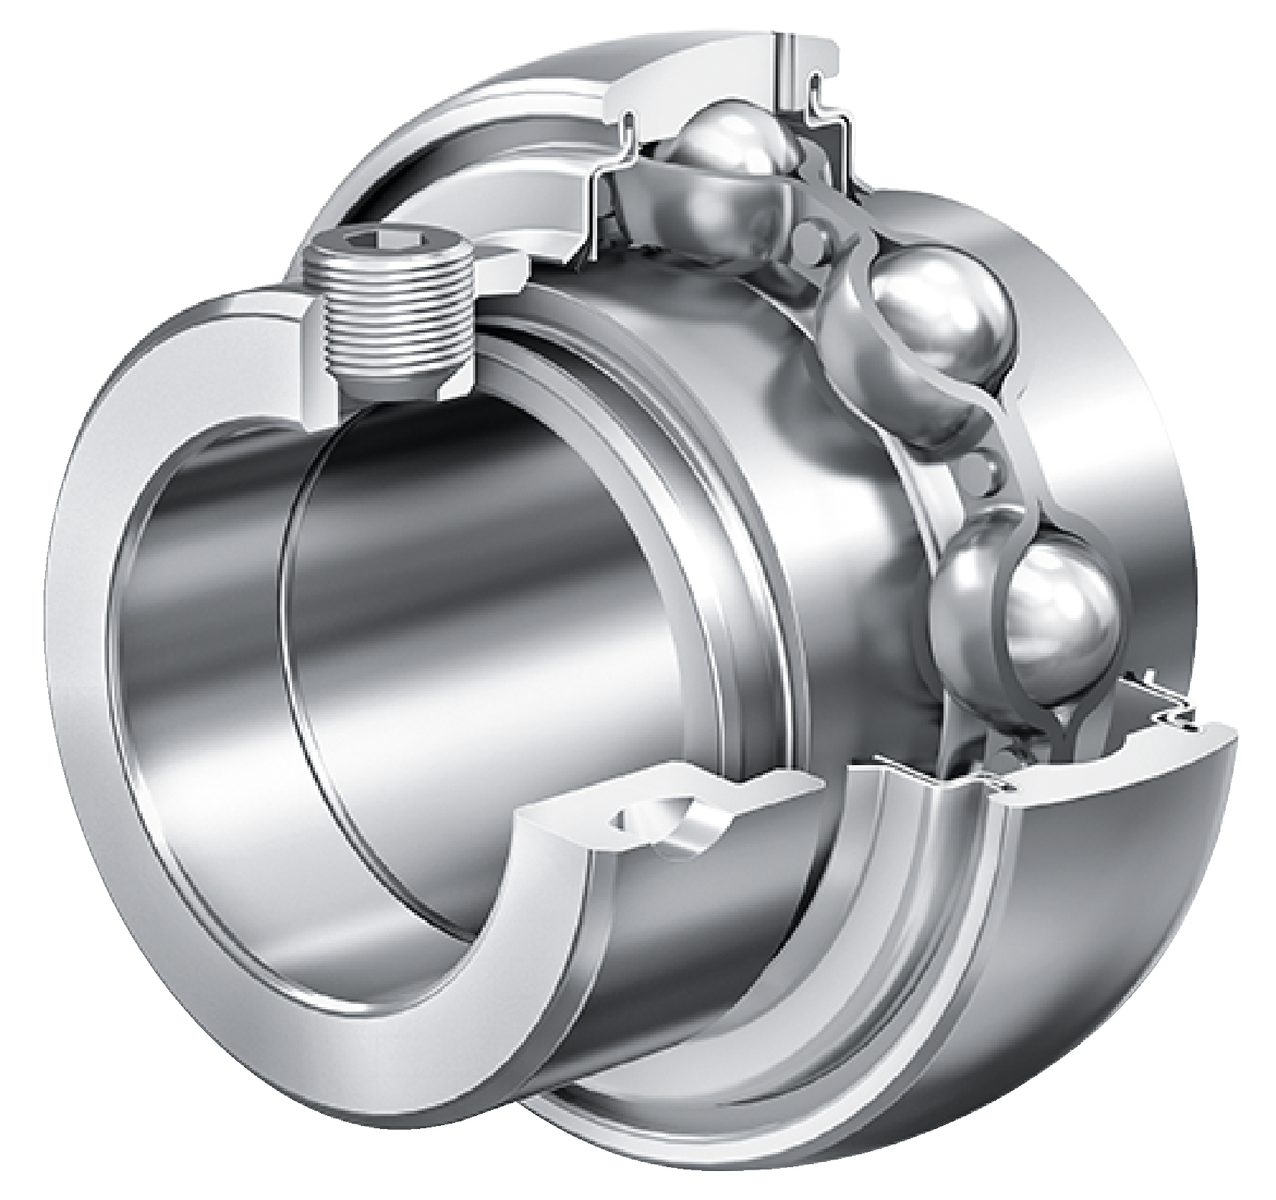 Radial Insert Ball Bearing GE..-XL-KRR-B-FA164, Spherical Outer Ring, Eccentric Locking Collar, R Seals on Both Sides, High Temperature GE70-XL-KRR-B-FA164